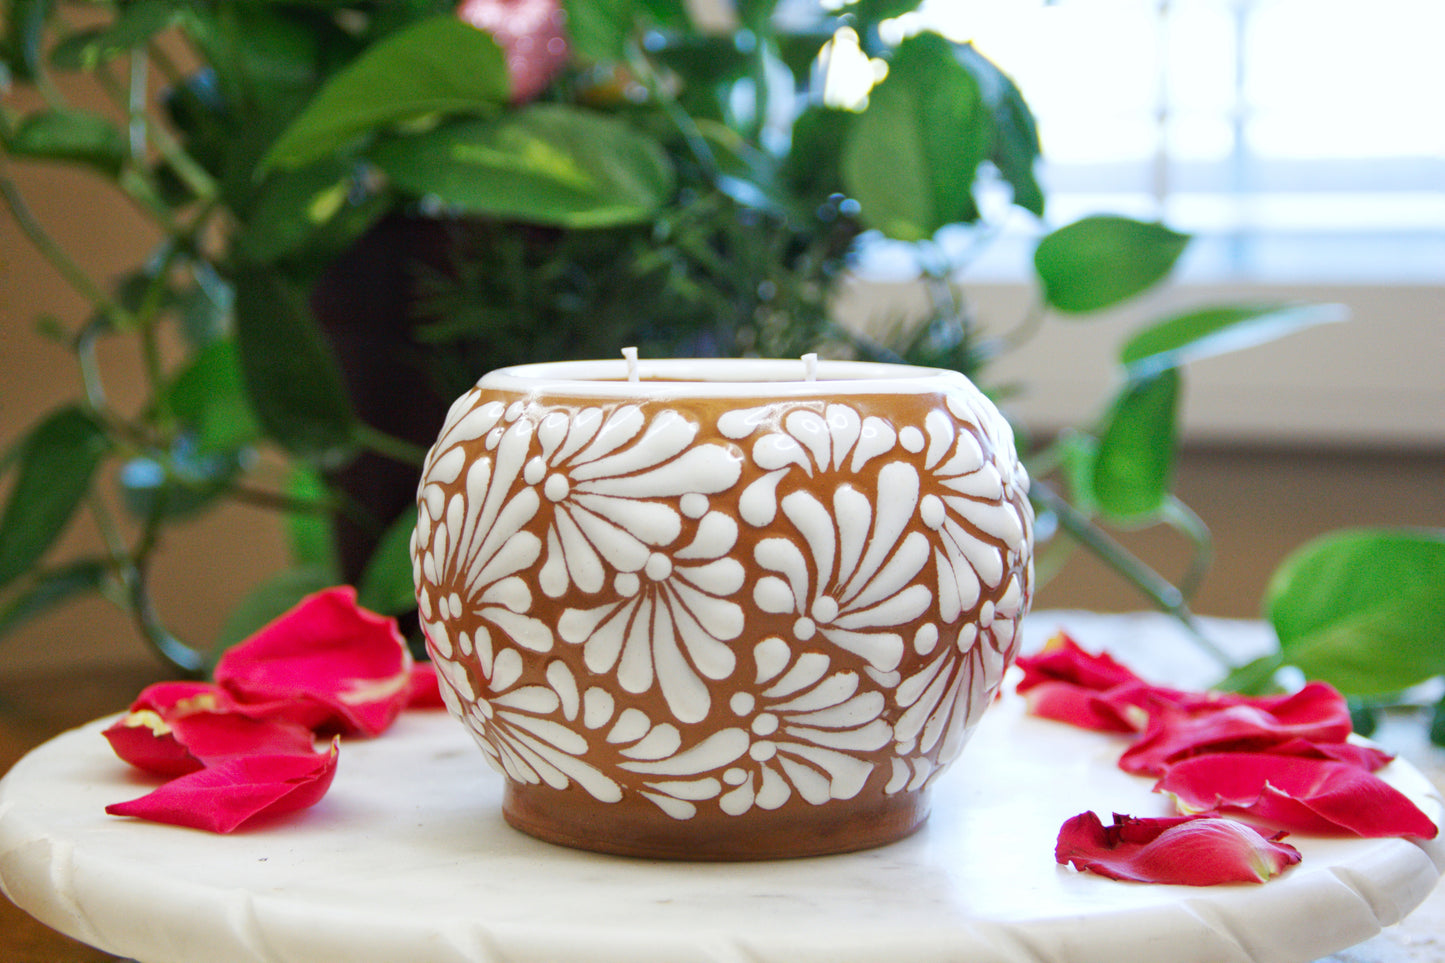 side view of an Artisanal candle in a beautiful brown cup with handle, handmade white paint strokes design. Handcrafted by Artisan in Puebla, Mexico. 100% All Natural Soy Candle. Reuse the talavera as home decor or storage.